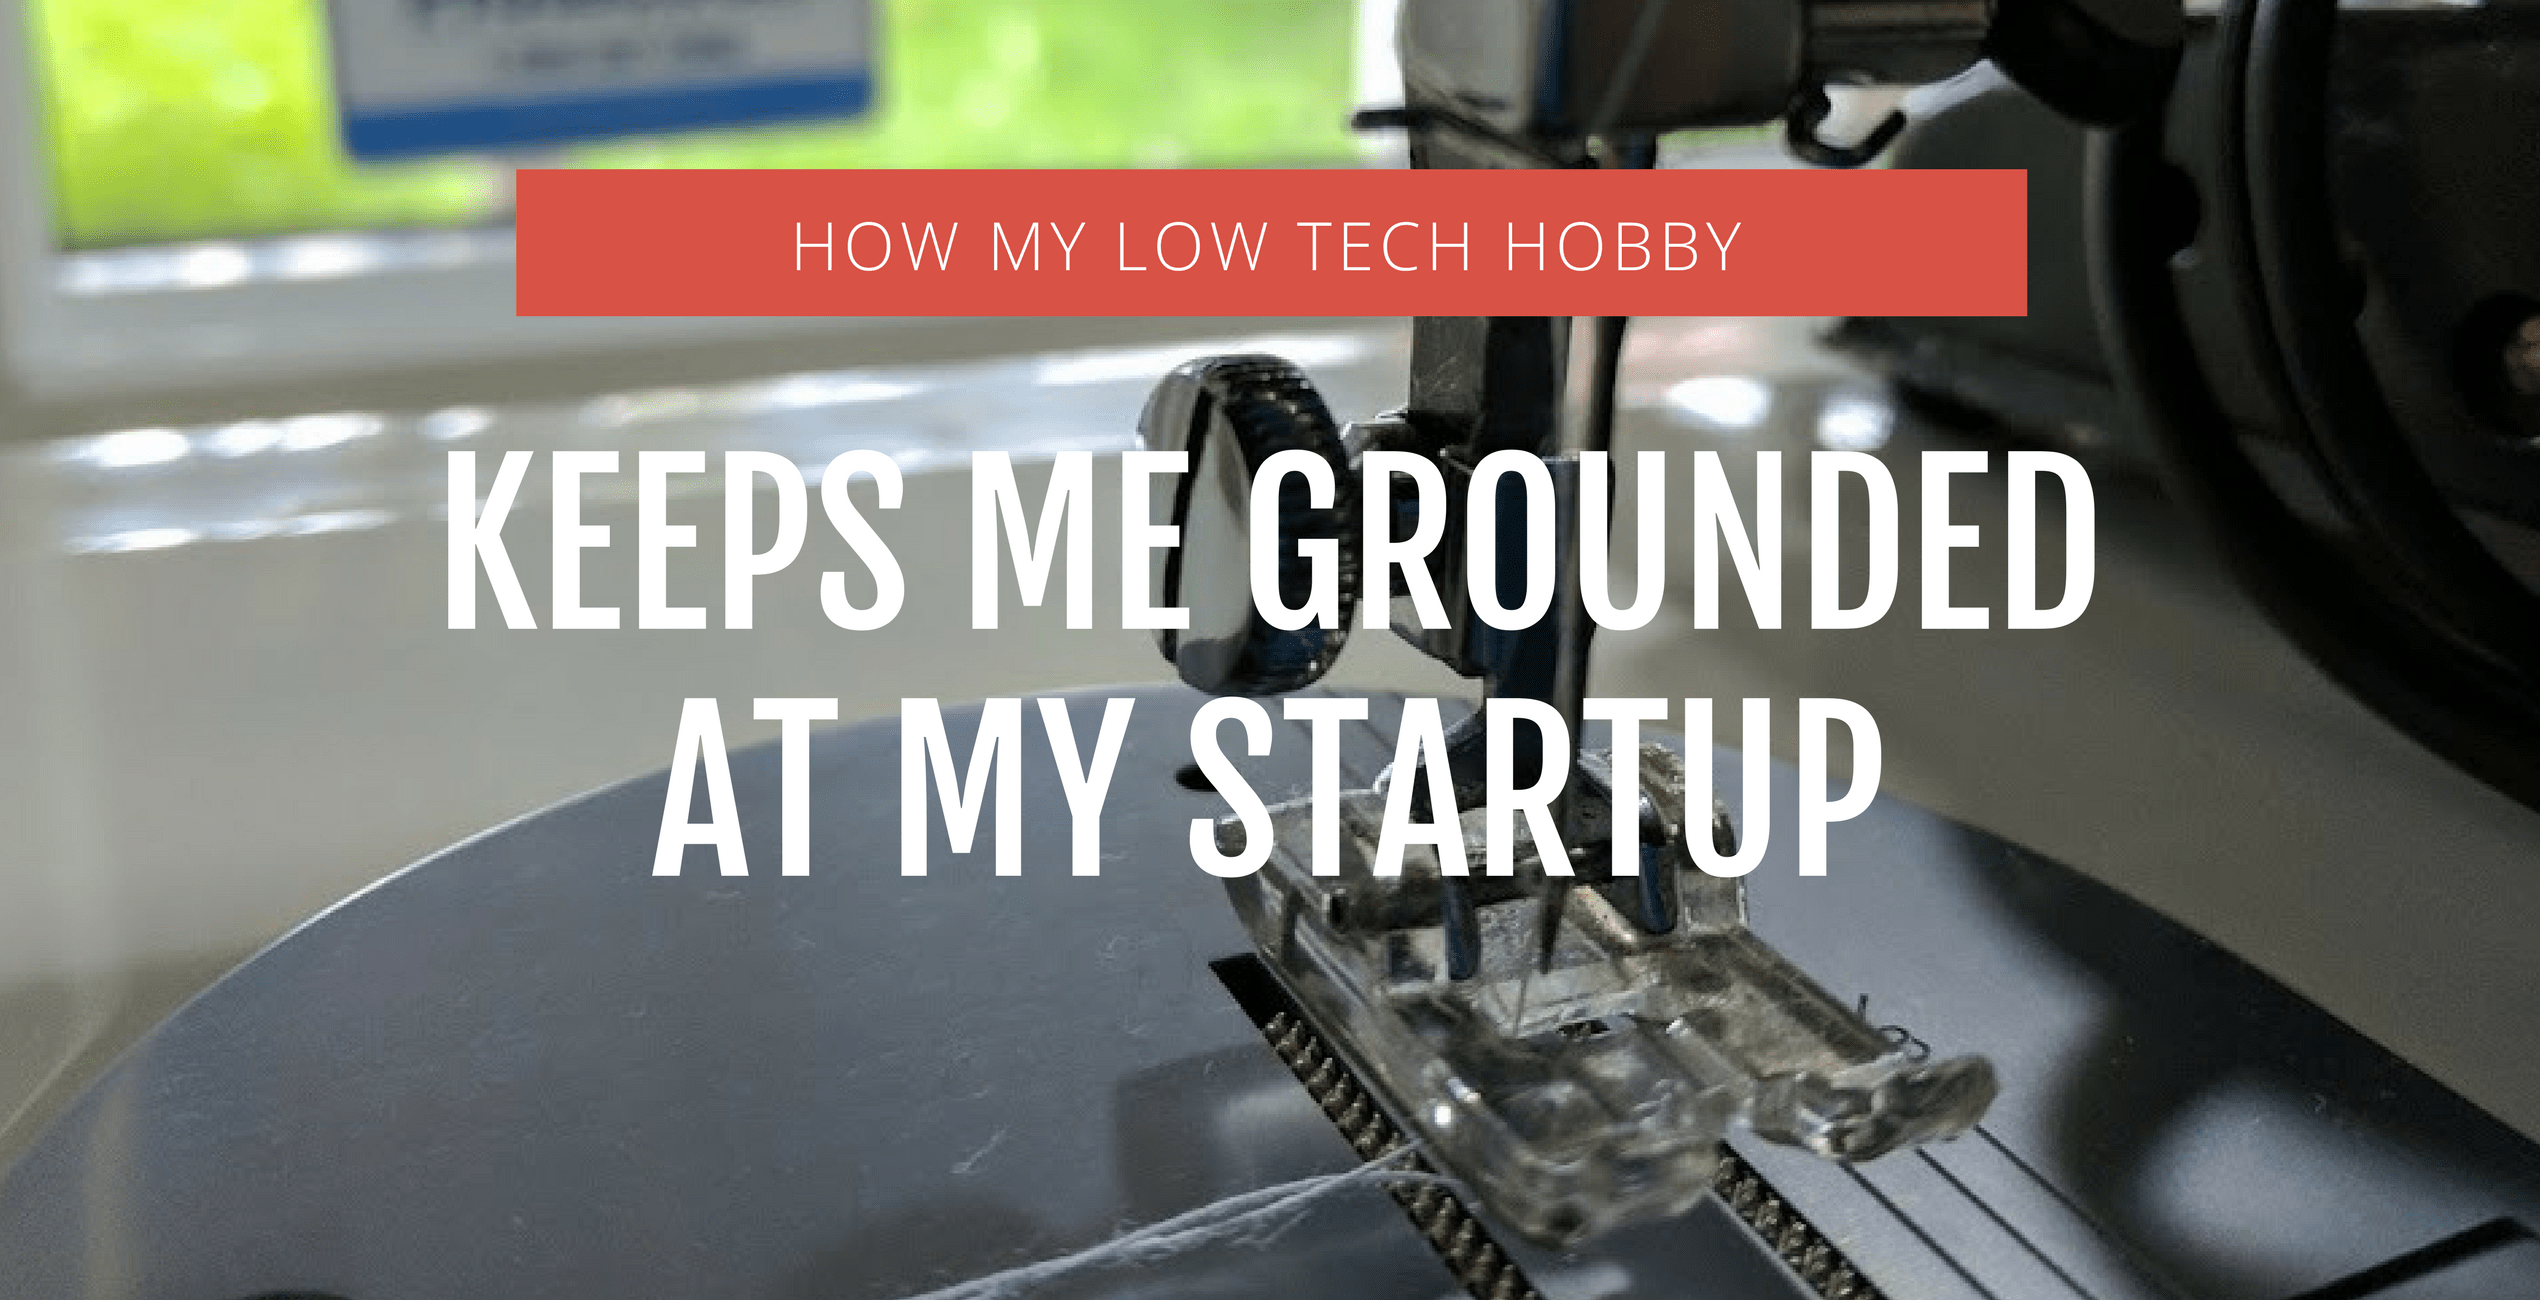 How My Low Tech Hobby Keeps Me Grounded At My Startup